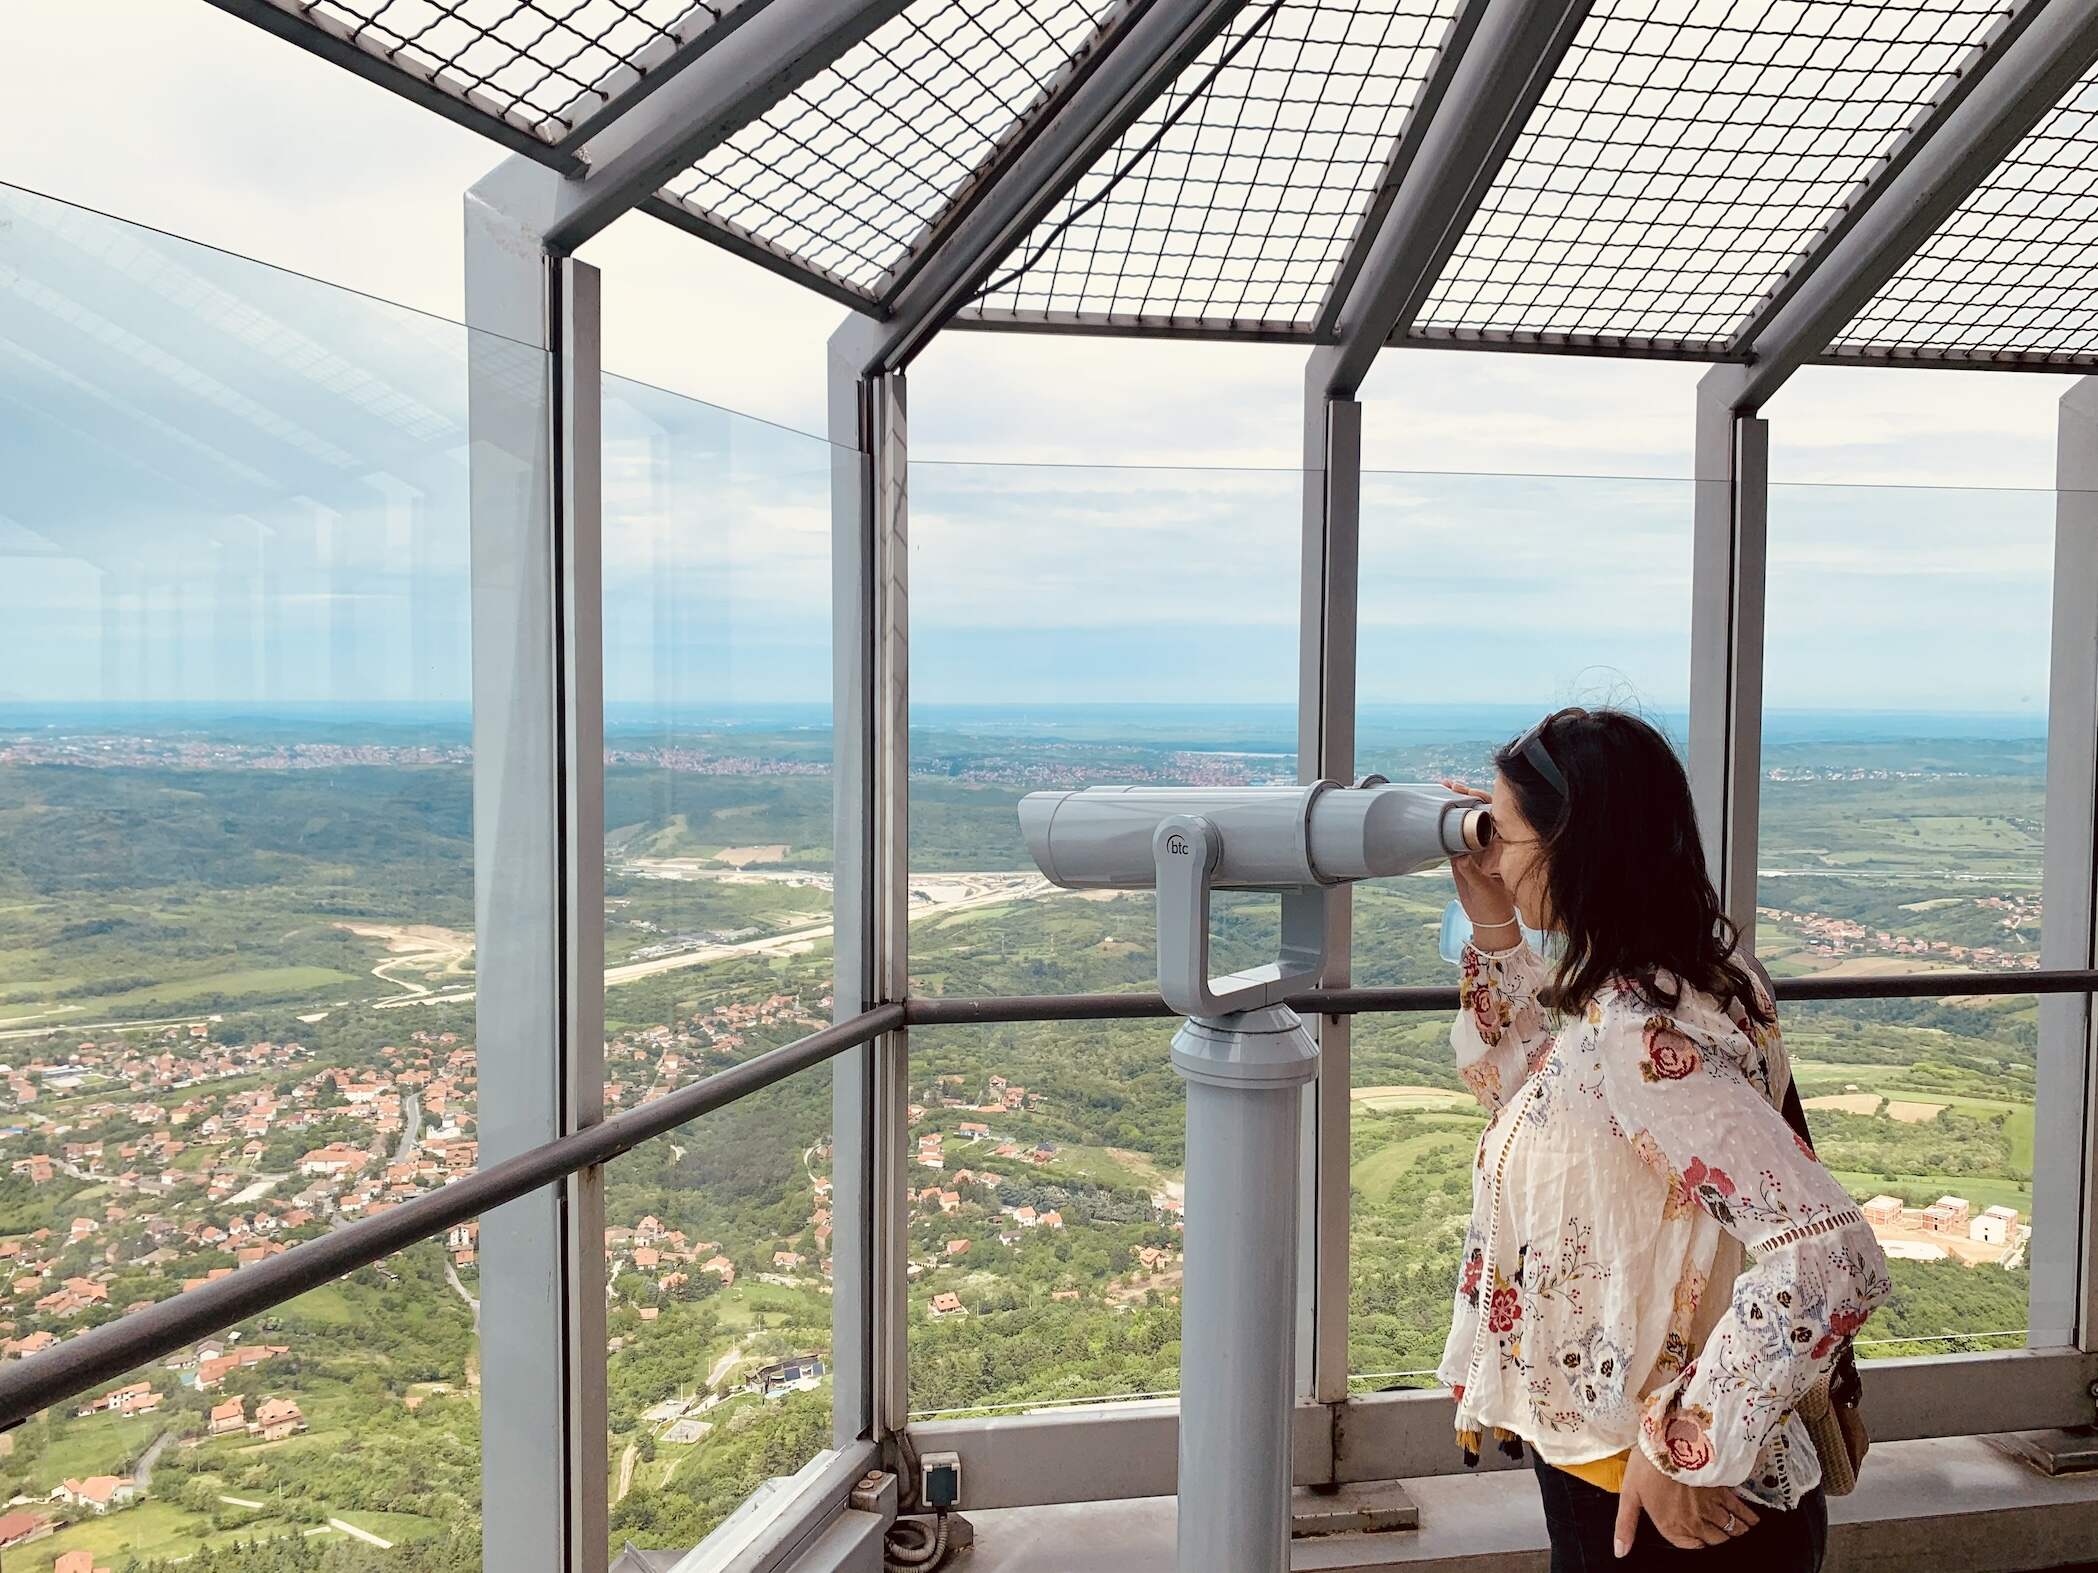 The observation deck at Avala TV Tower in Belgrade